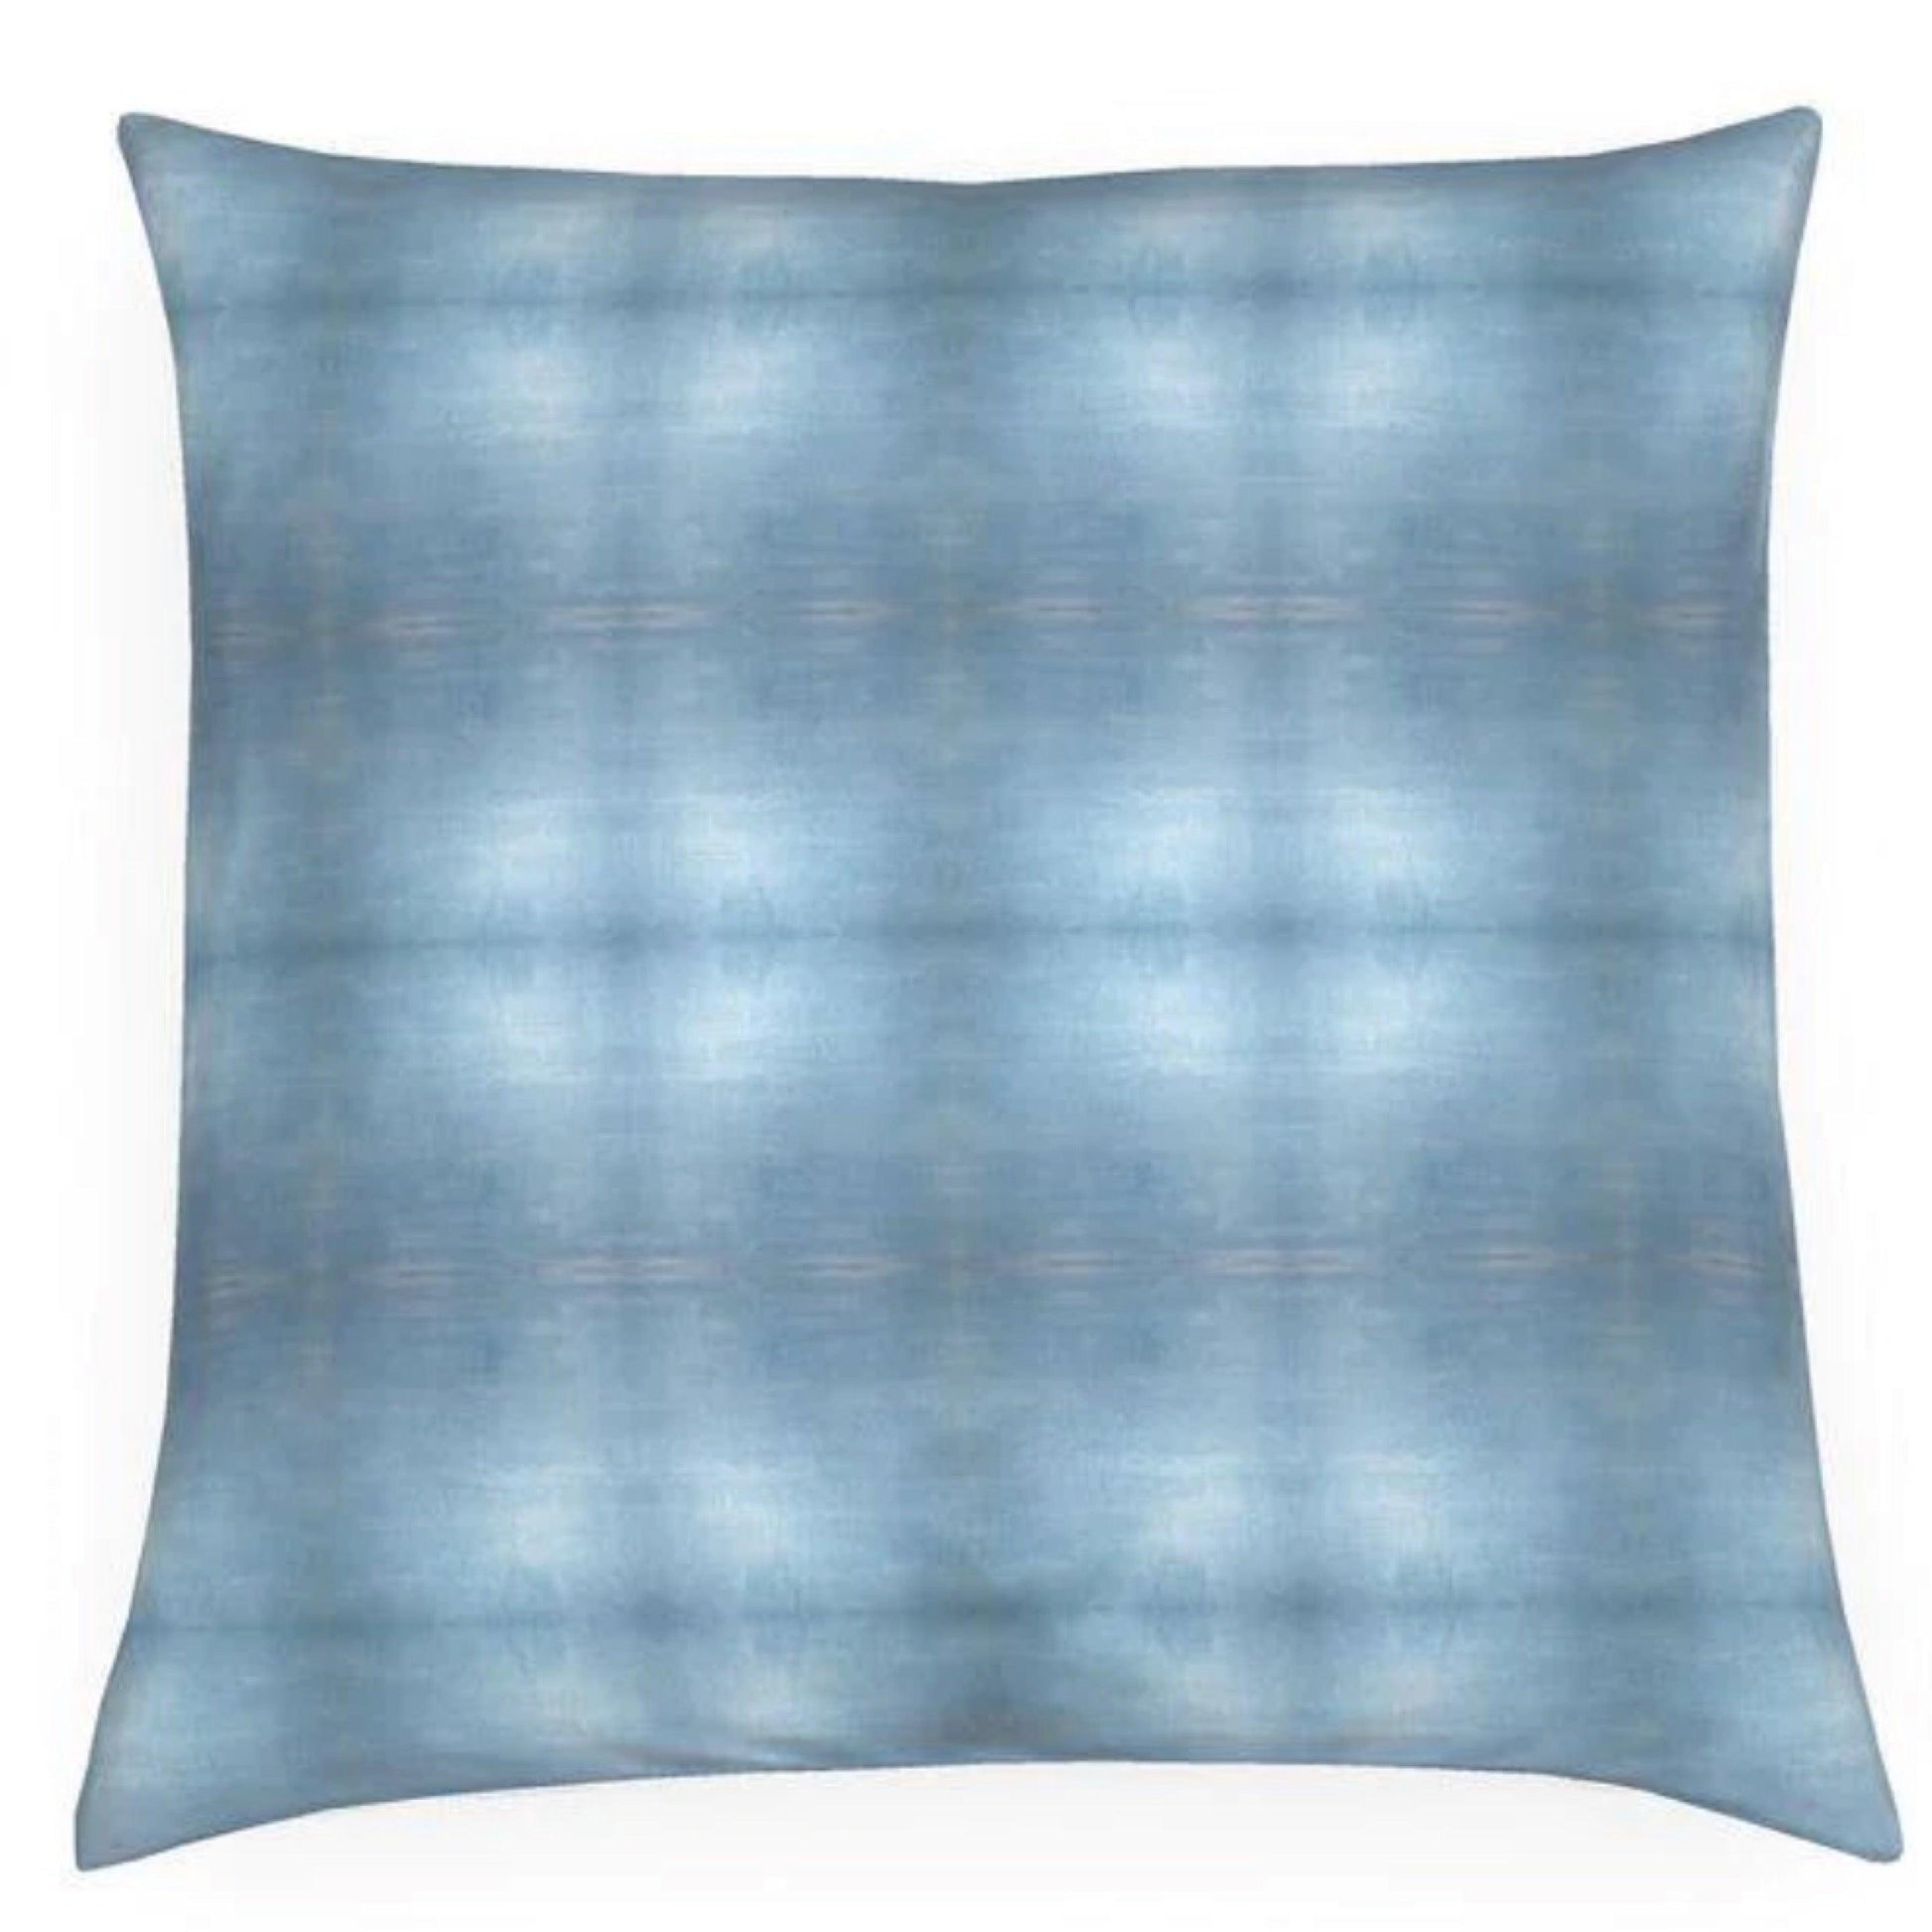 The Blues Plaid Luxury Decorative Throw Pillow 24" x 24" - The White Barn Antiques